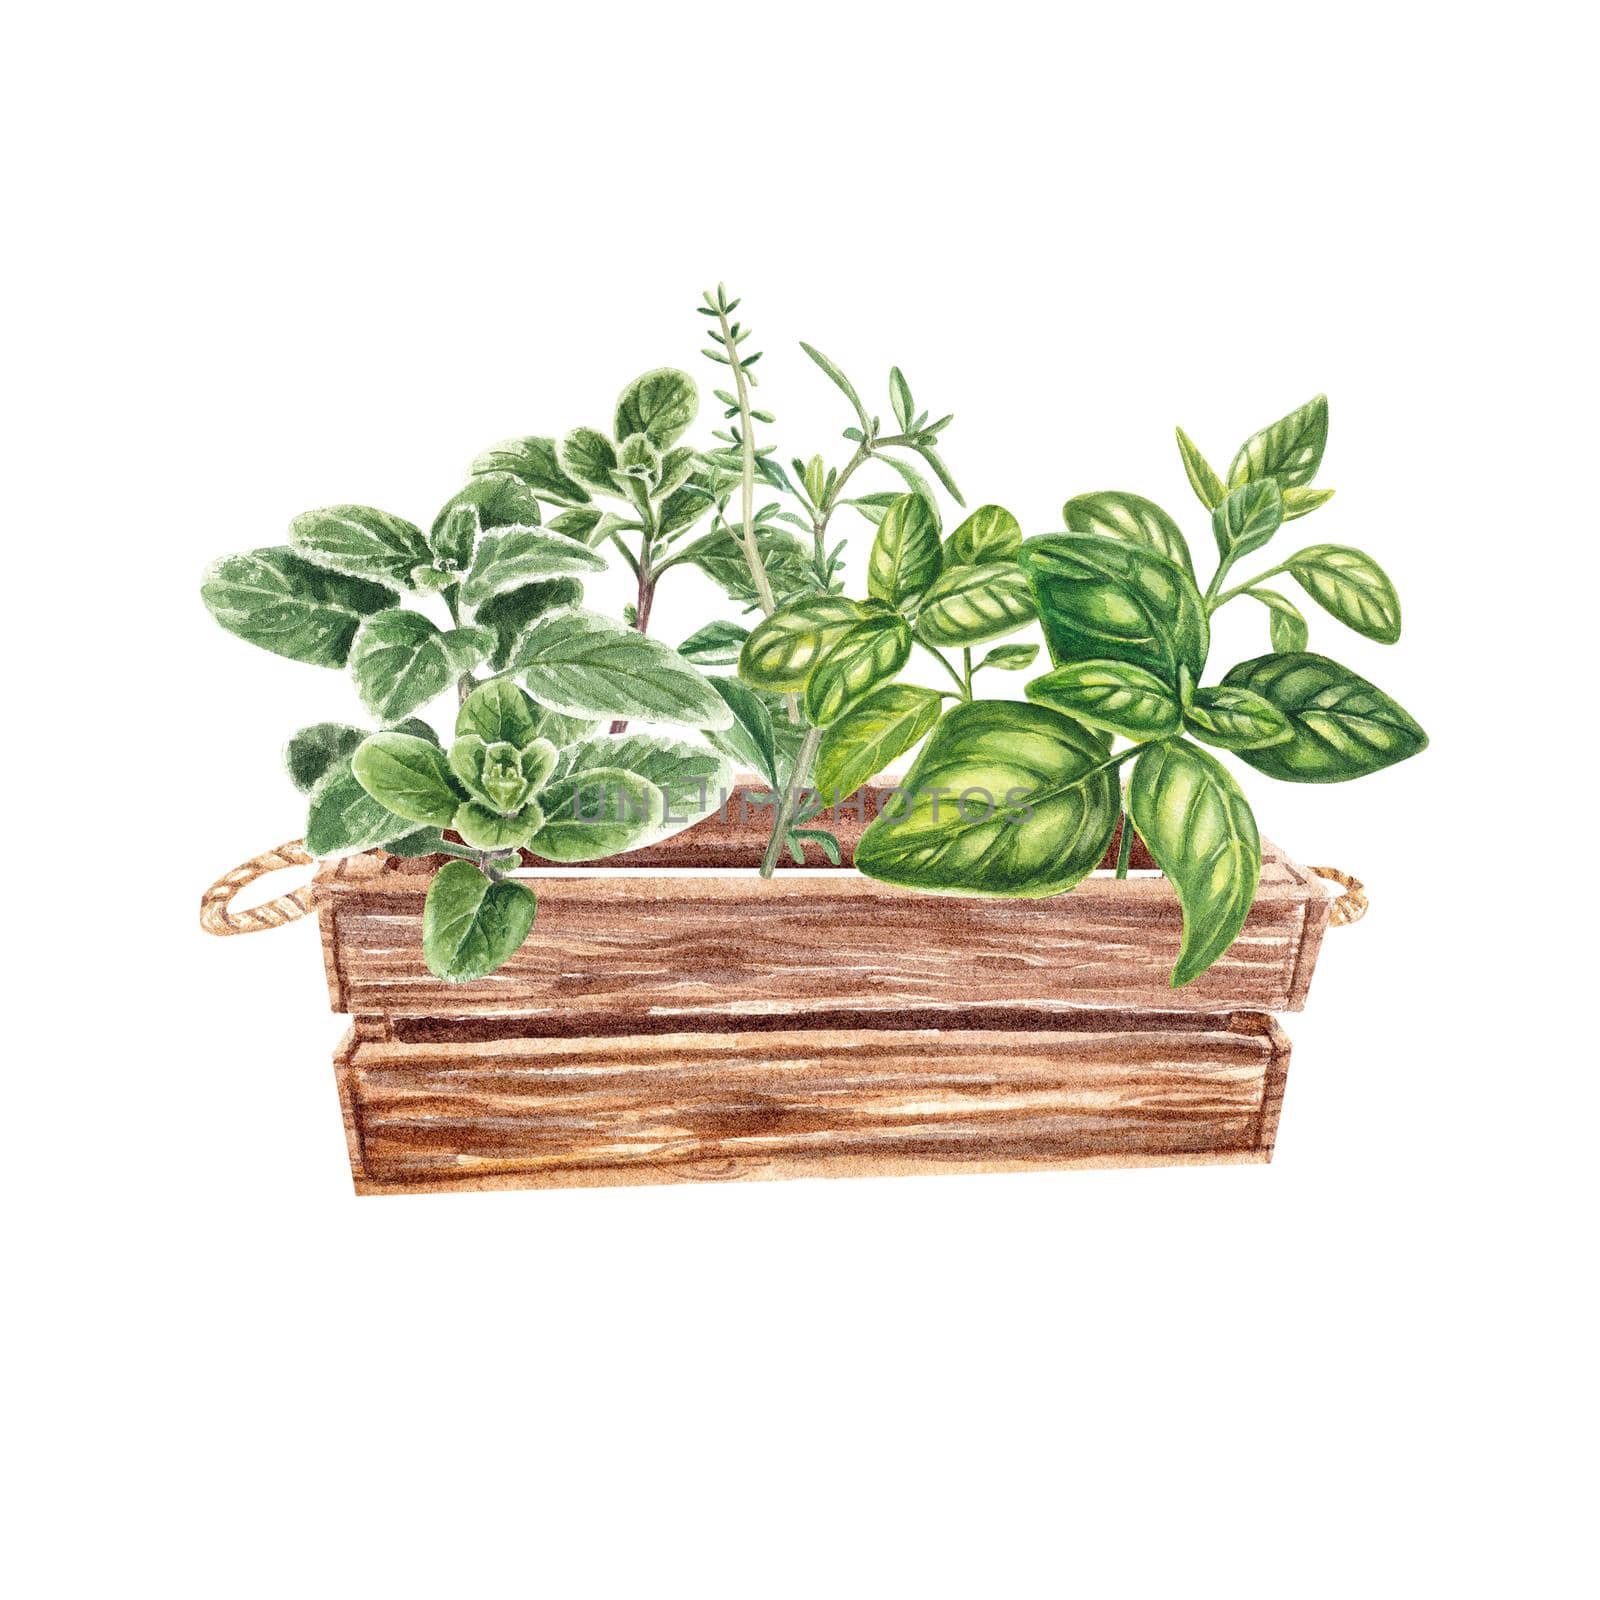 Marjoram, basil, Thyme in a wooden box on a white background. Provencal herbs, kitchen spices in watercolor. Homemade spicy herbs. The illustration is suitable for booklets, restaurant menus, design by NastyaChe